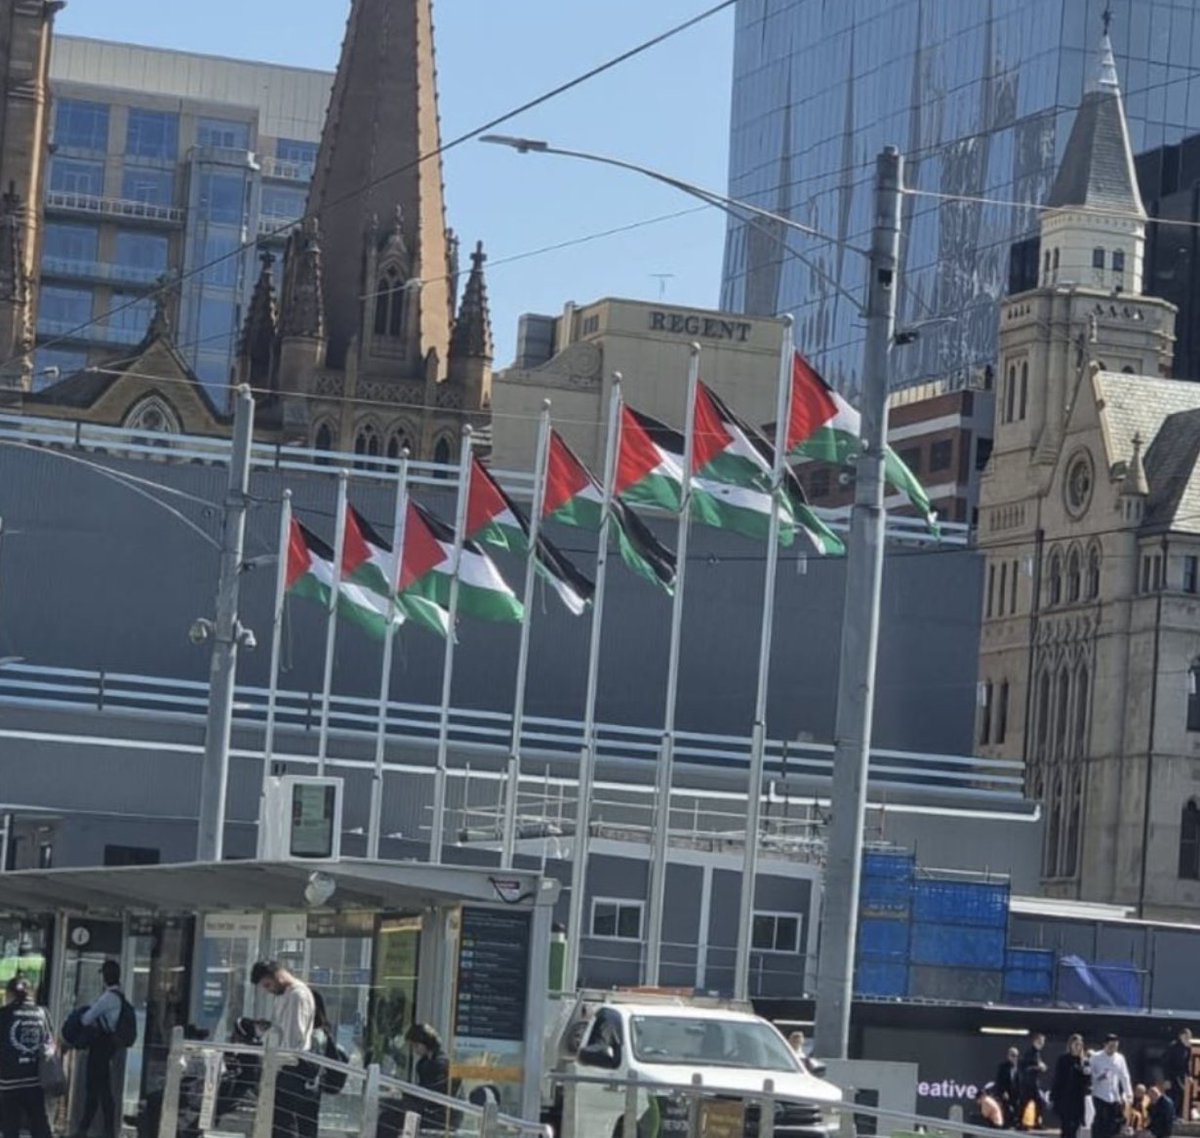 Why are these flags flying in the middle of Melbourne? @cityofmelbourne?